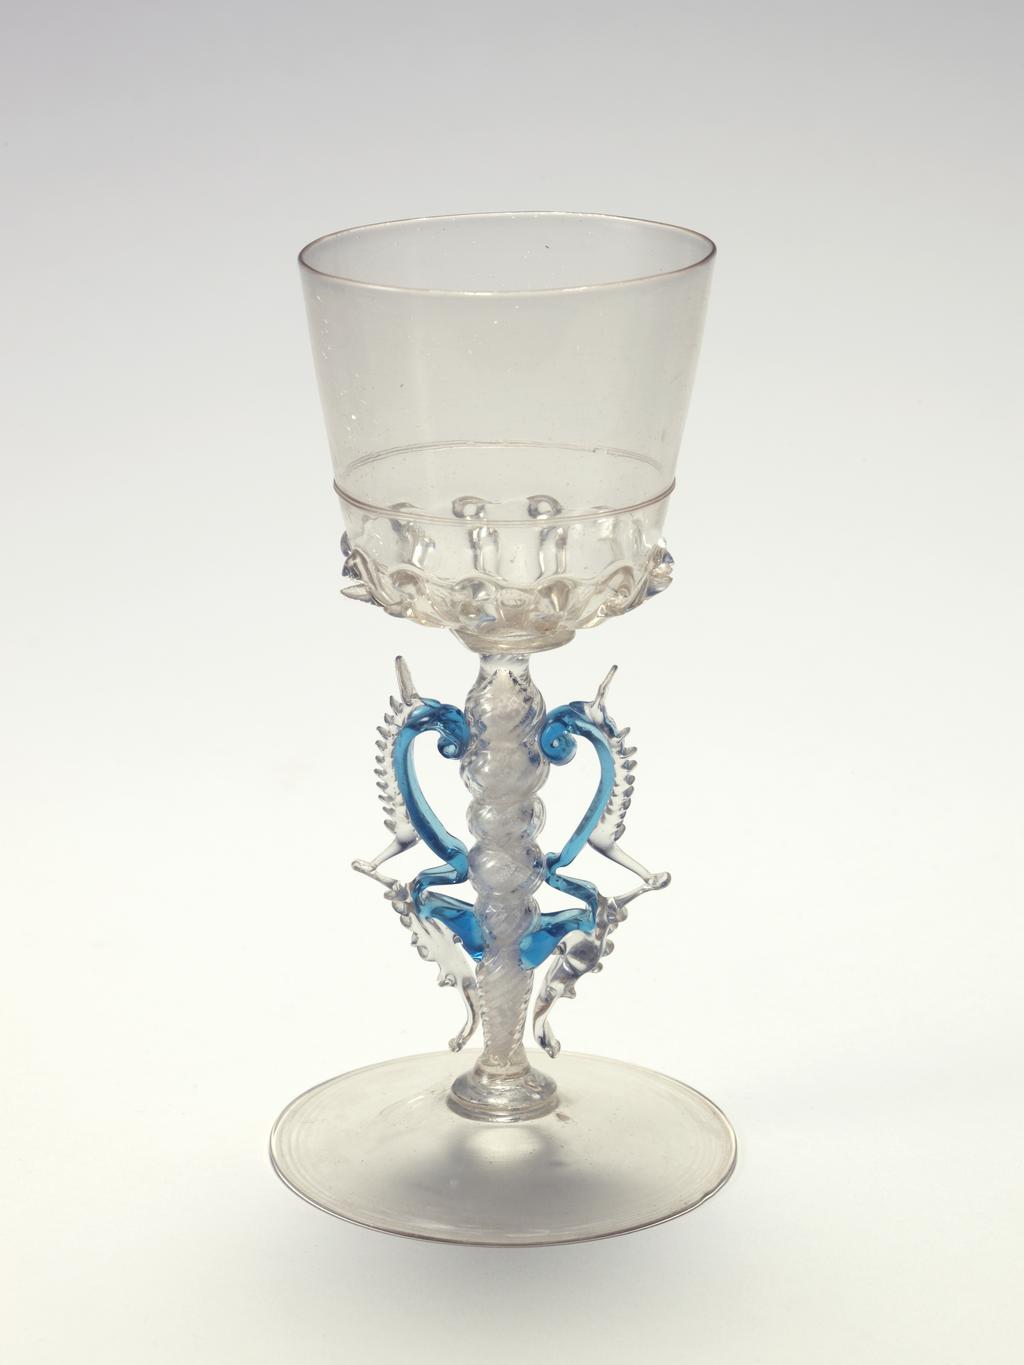 An image of Wine Glass. Unknown production, probably Venice. Approximately a bucket-shaped bowl with ribbed base. A double fillet at the mid-way point. Stem with fine small knops, spinal ribbing and tapering towards a plain foot. Blue wings with colourless denticulations. Crizzling. Lead-glass, blown bowl, ribbed lower part of bowl and stem spine, height, whole, 6 1/4 in, diameter, whole, 3 1/4 in, circa 1600-1650. Façon de Venise. Venetian.